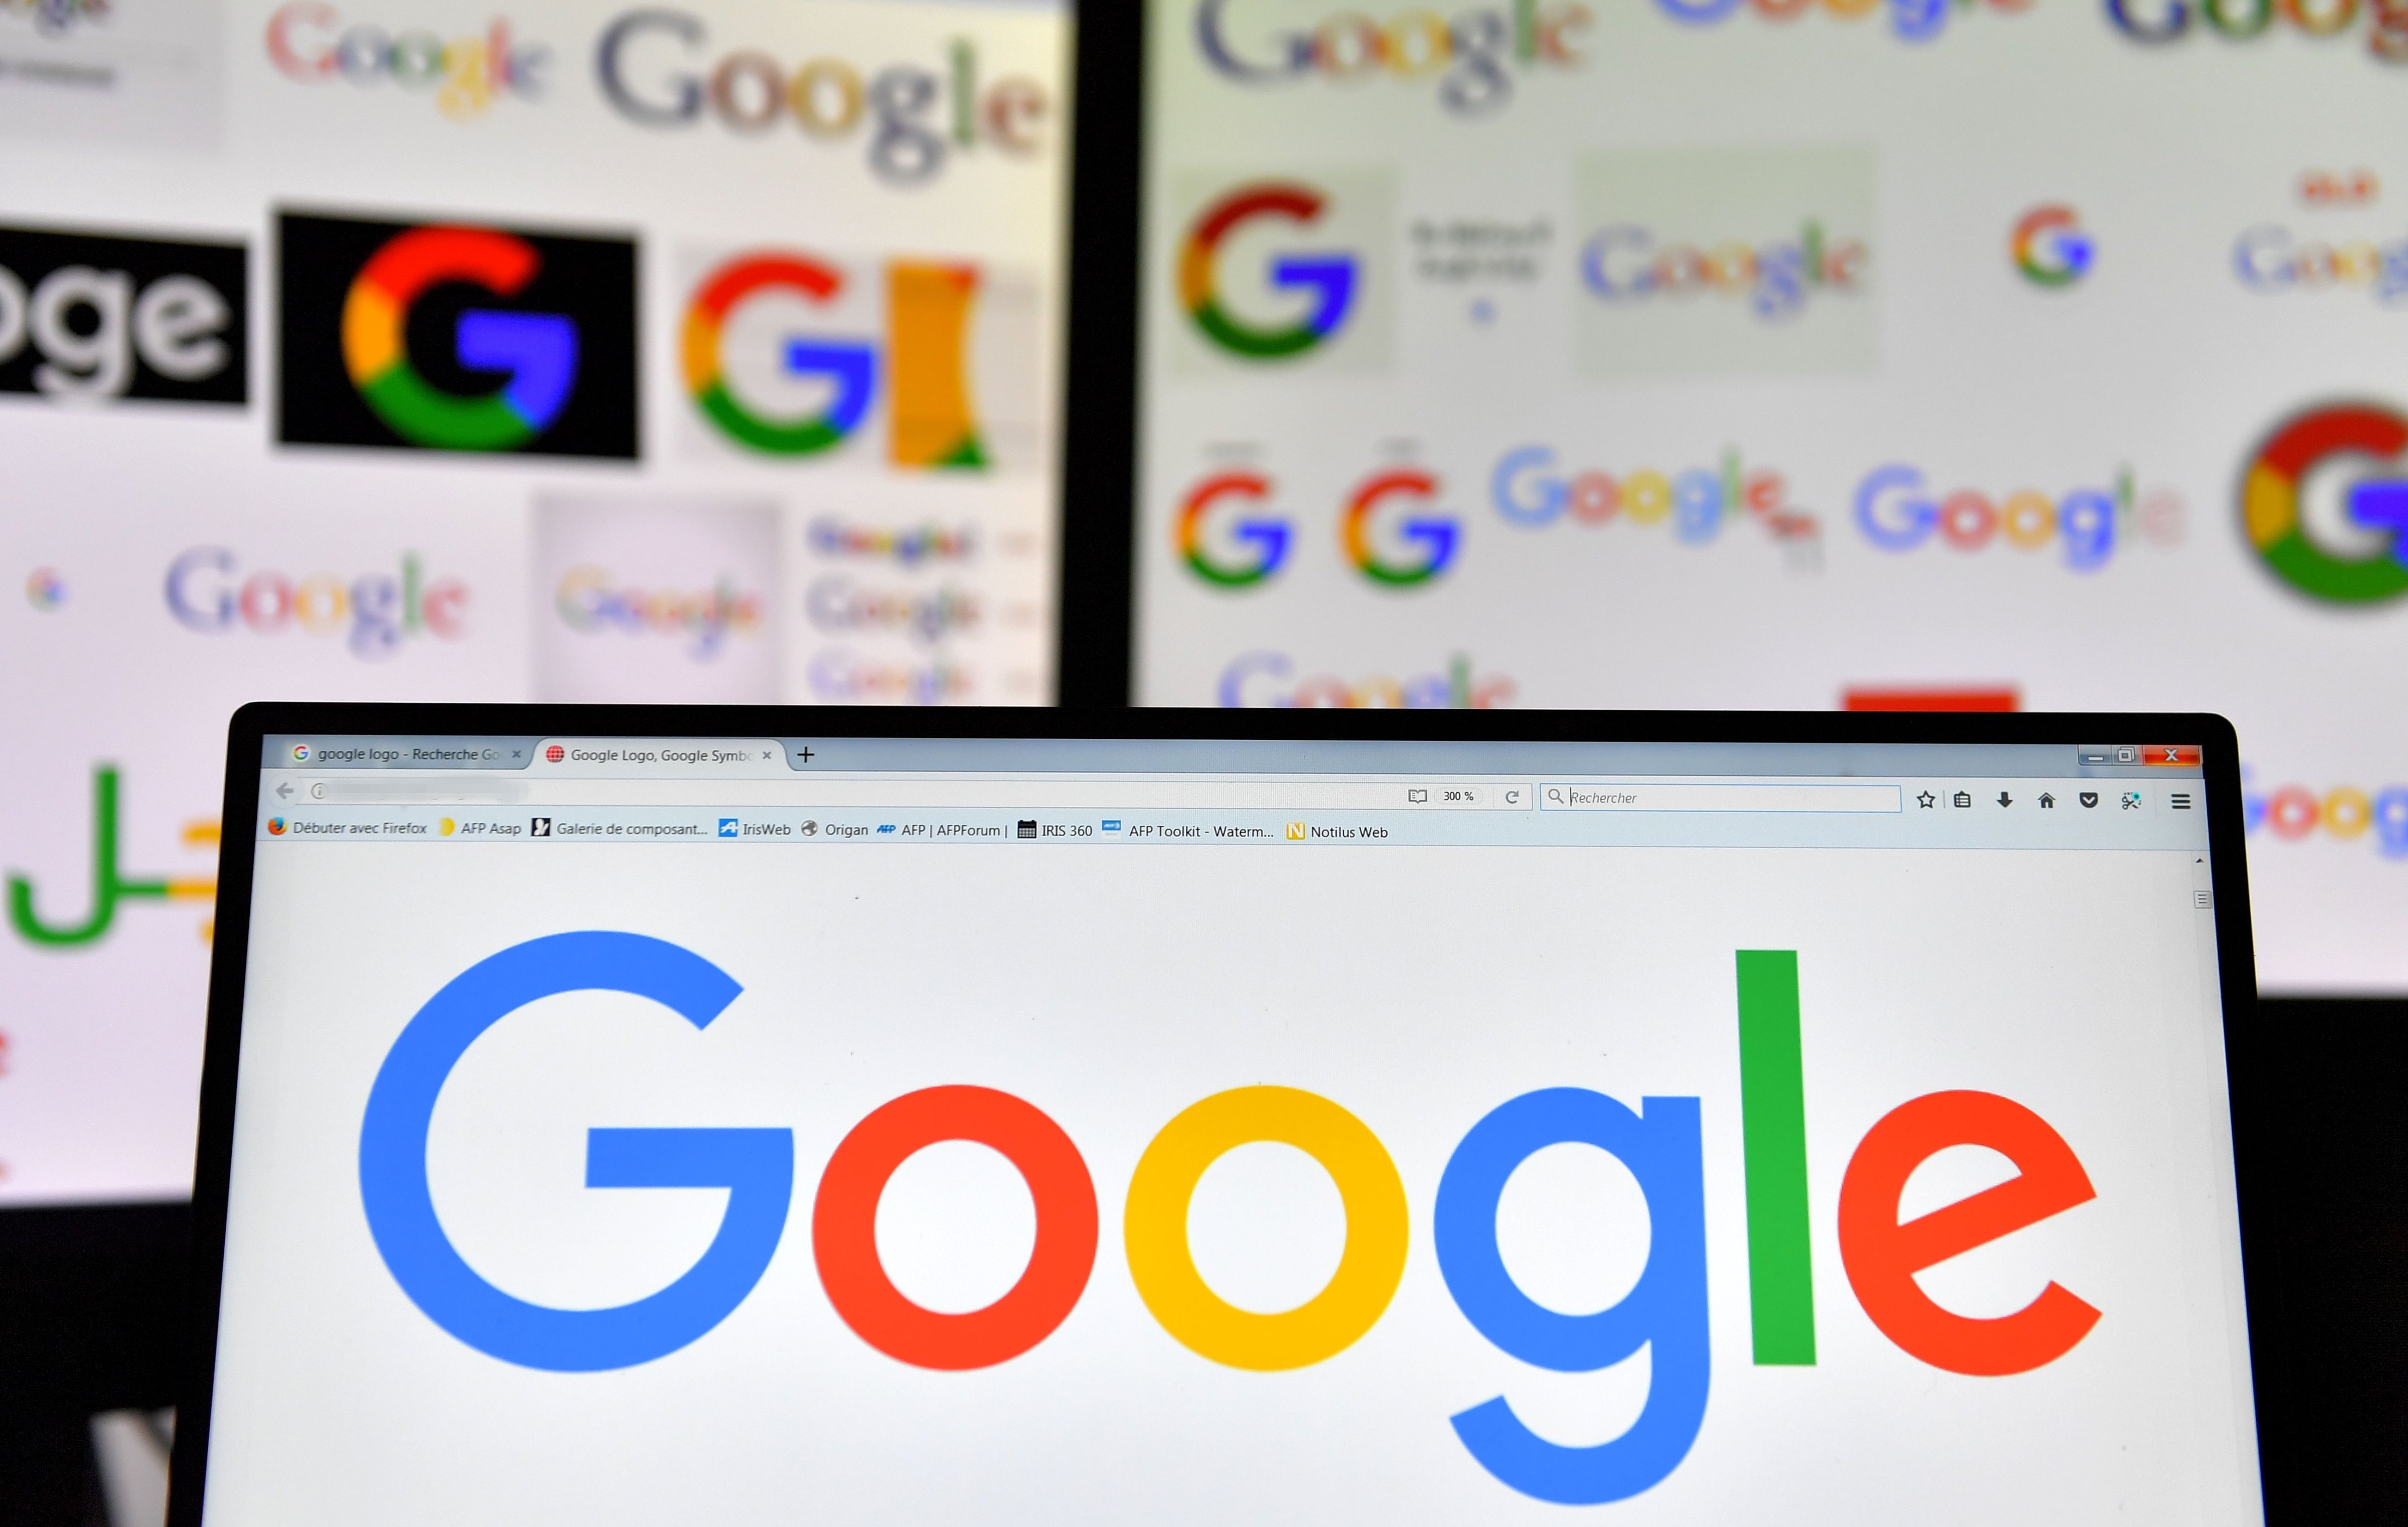 Google's logo is seen displayed on computer screens. (Loic Venance—AFP/Getty Images)